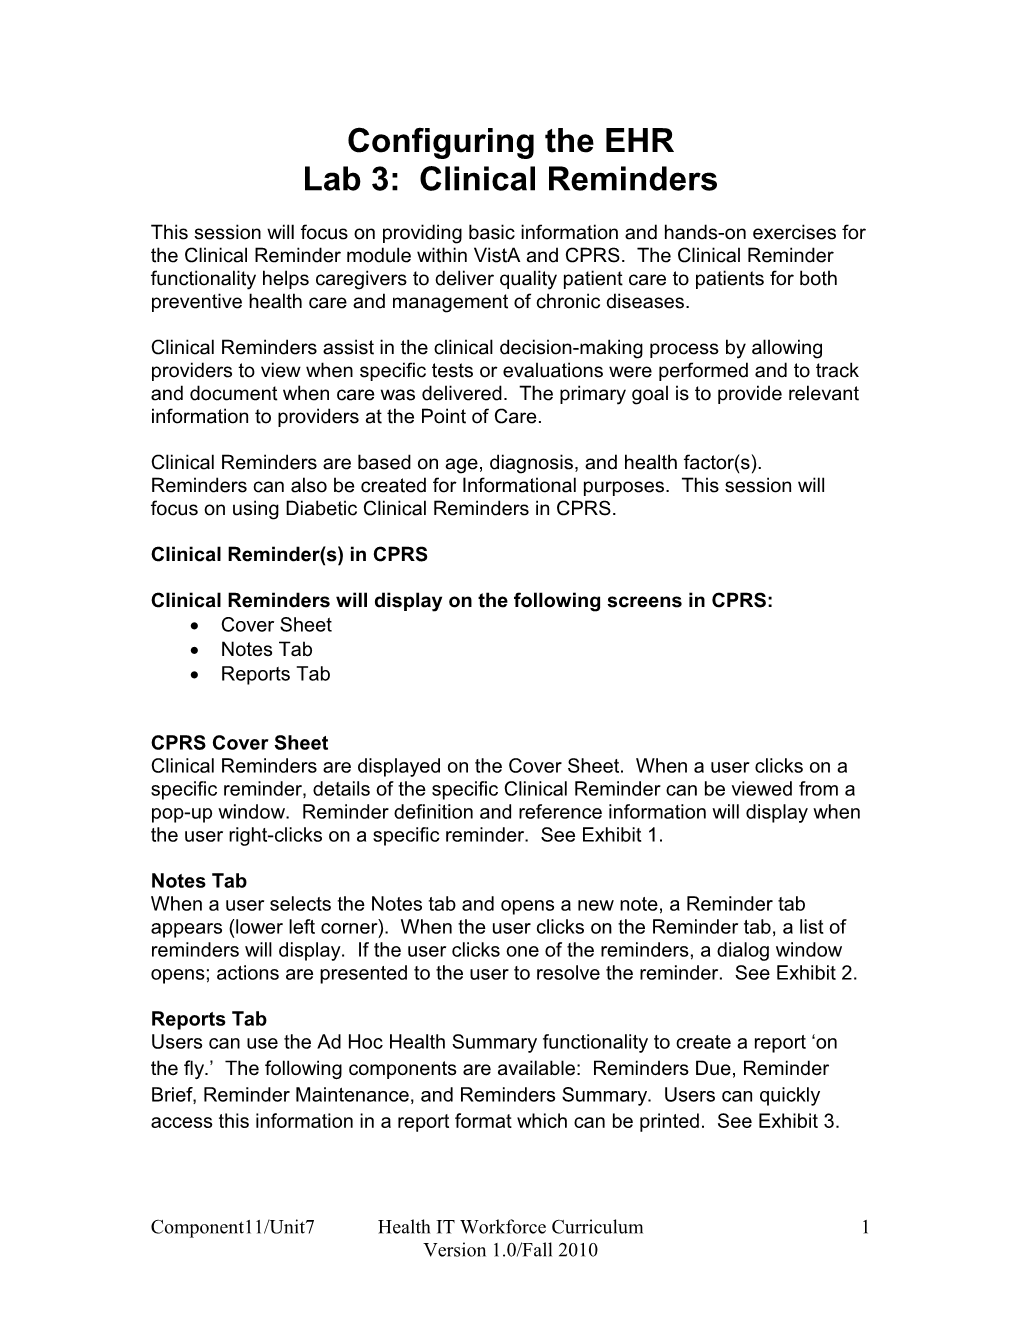 Part 4: Clinical Reminders